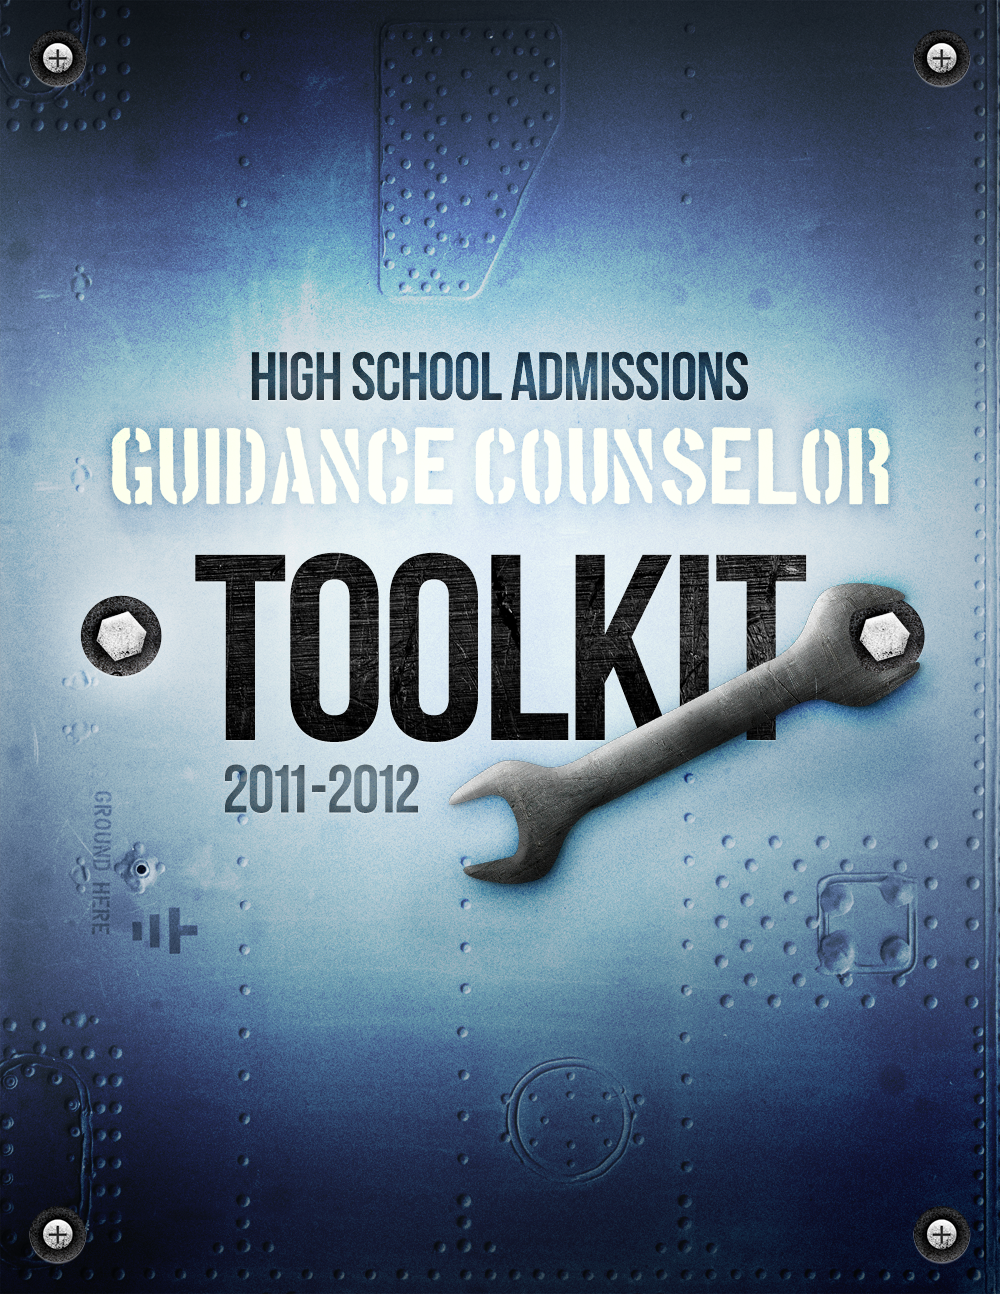 Guidance Counselor Toolkit - 3